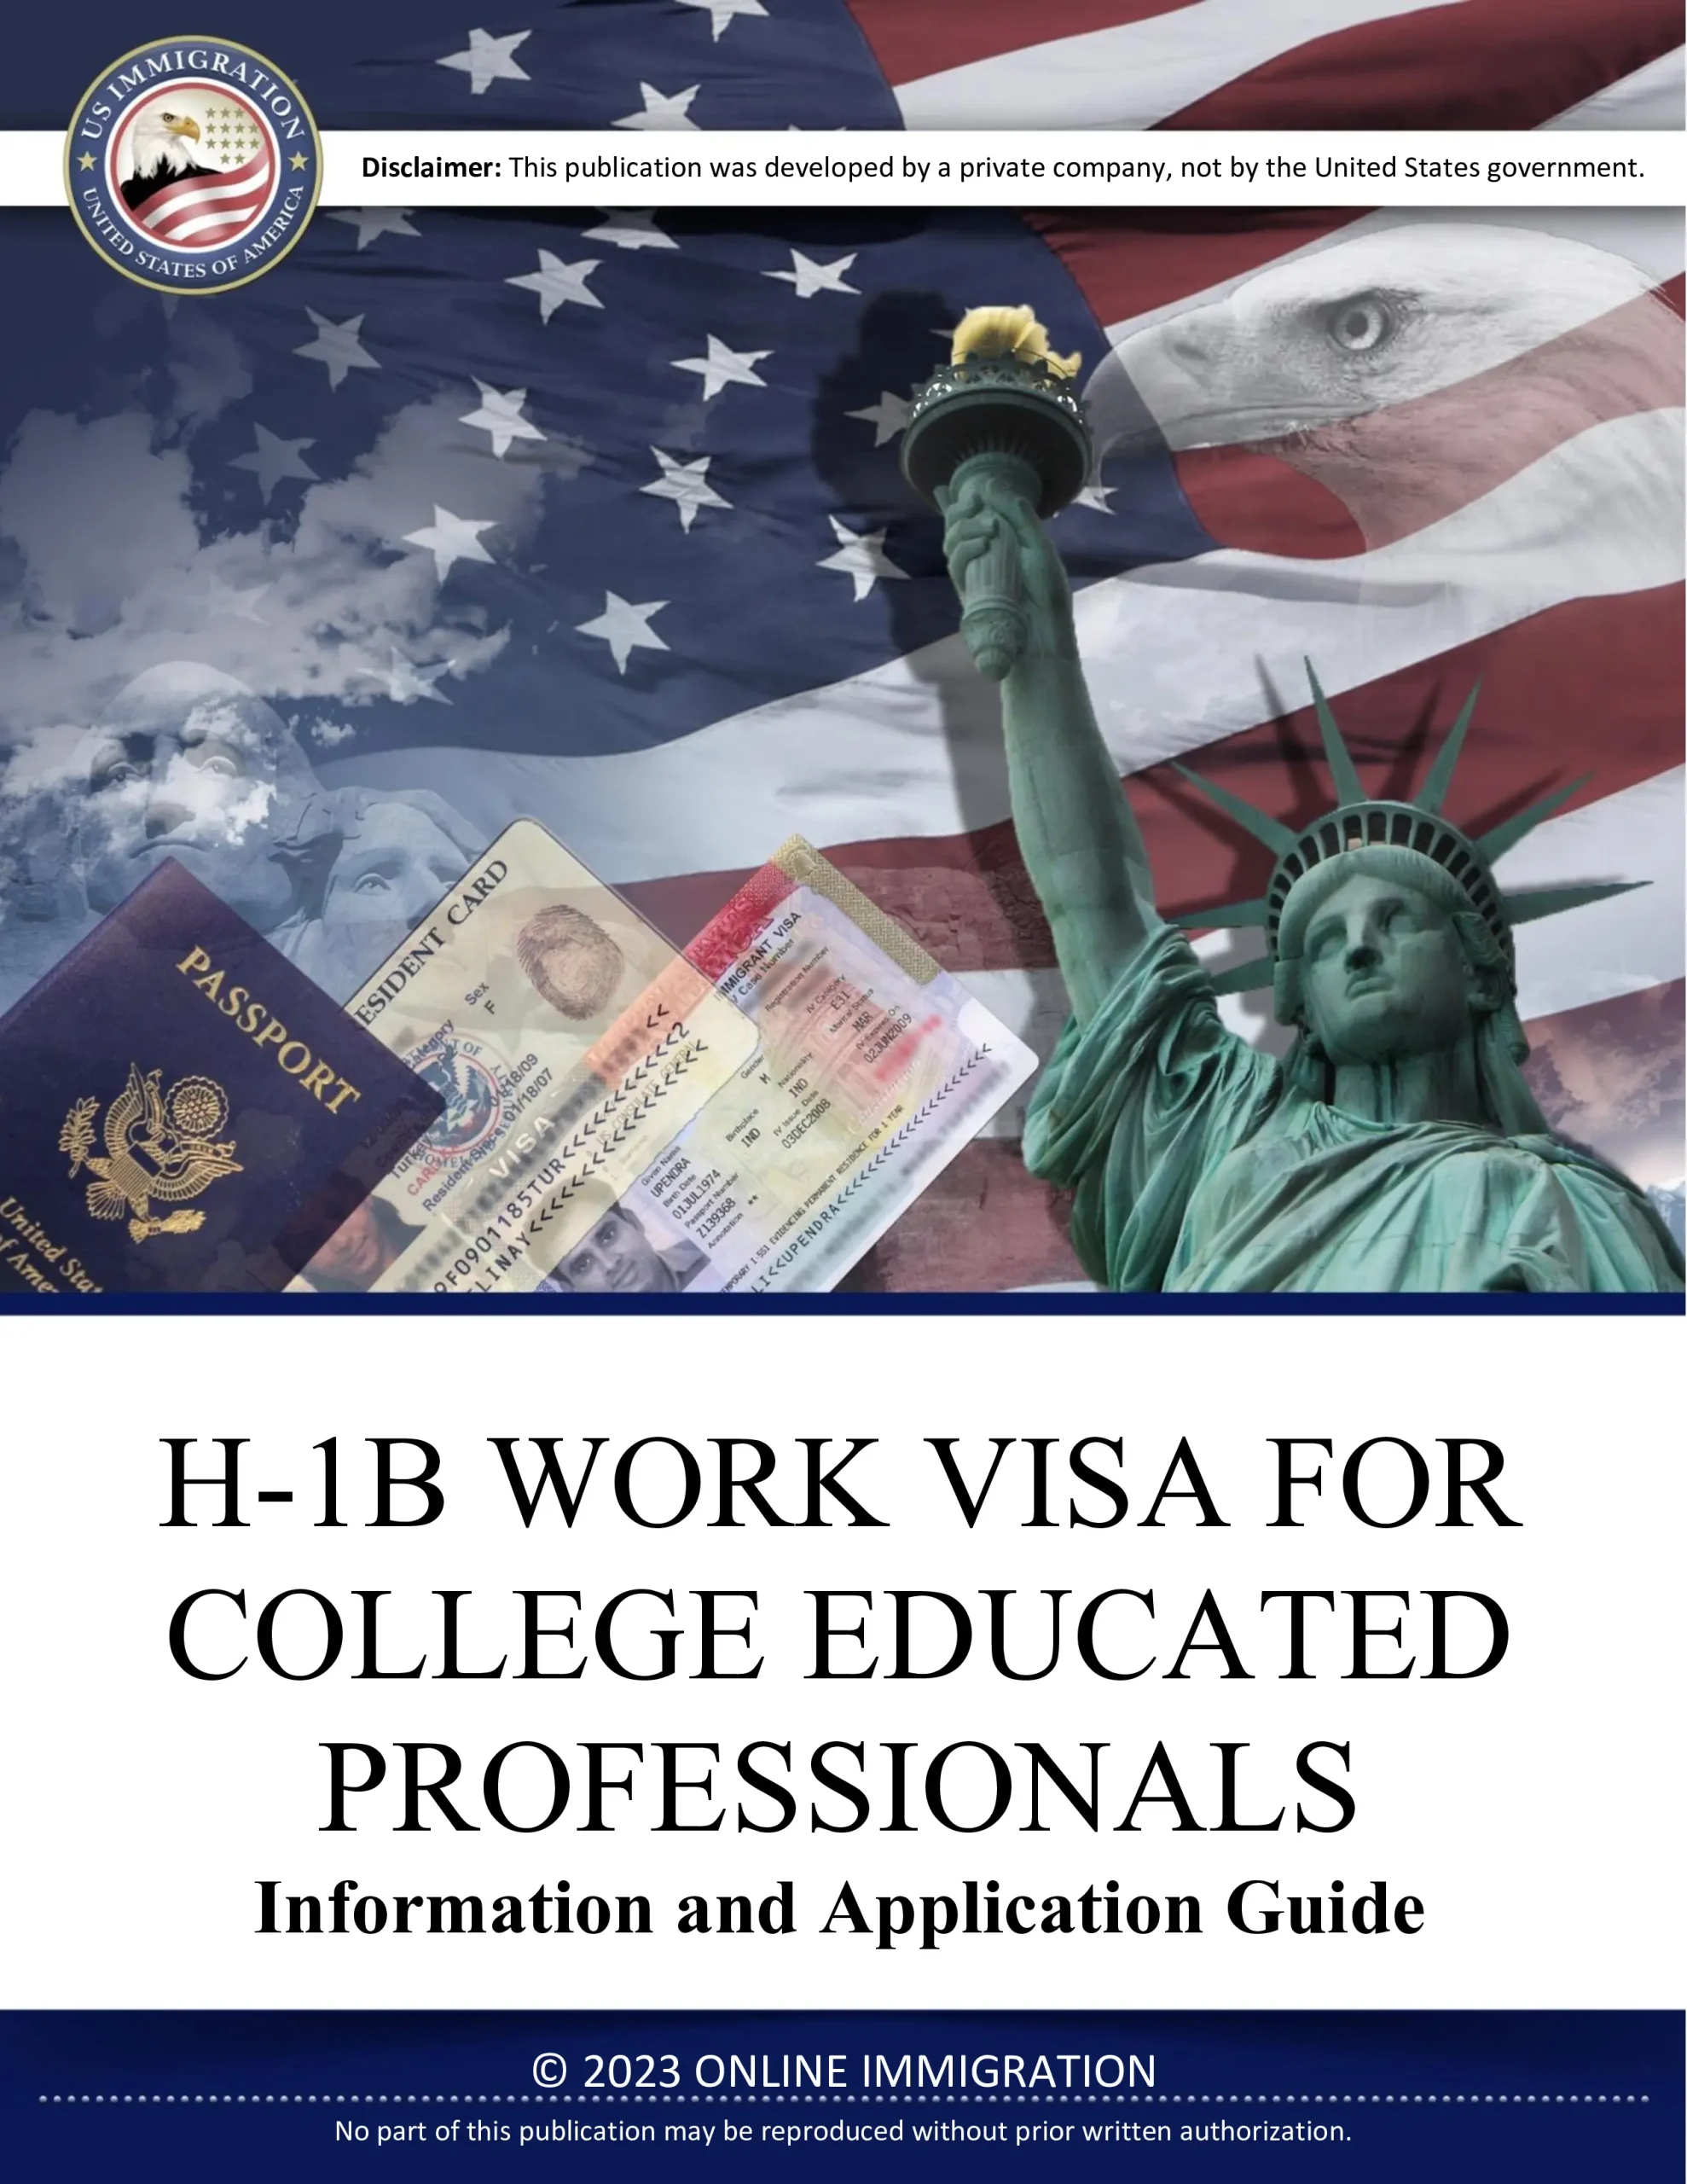 H-1B Work Visa for College Educated Professionals